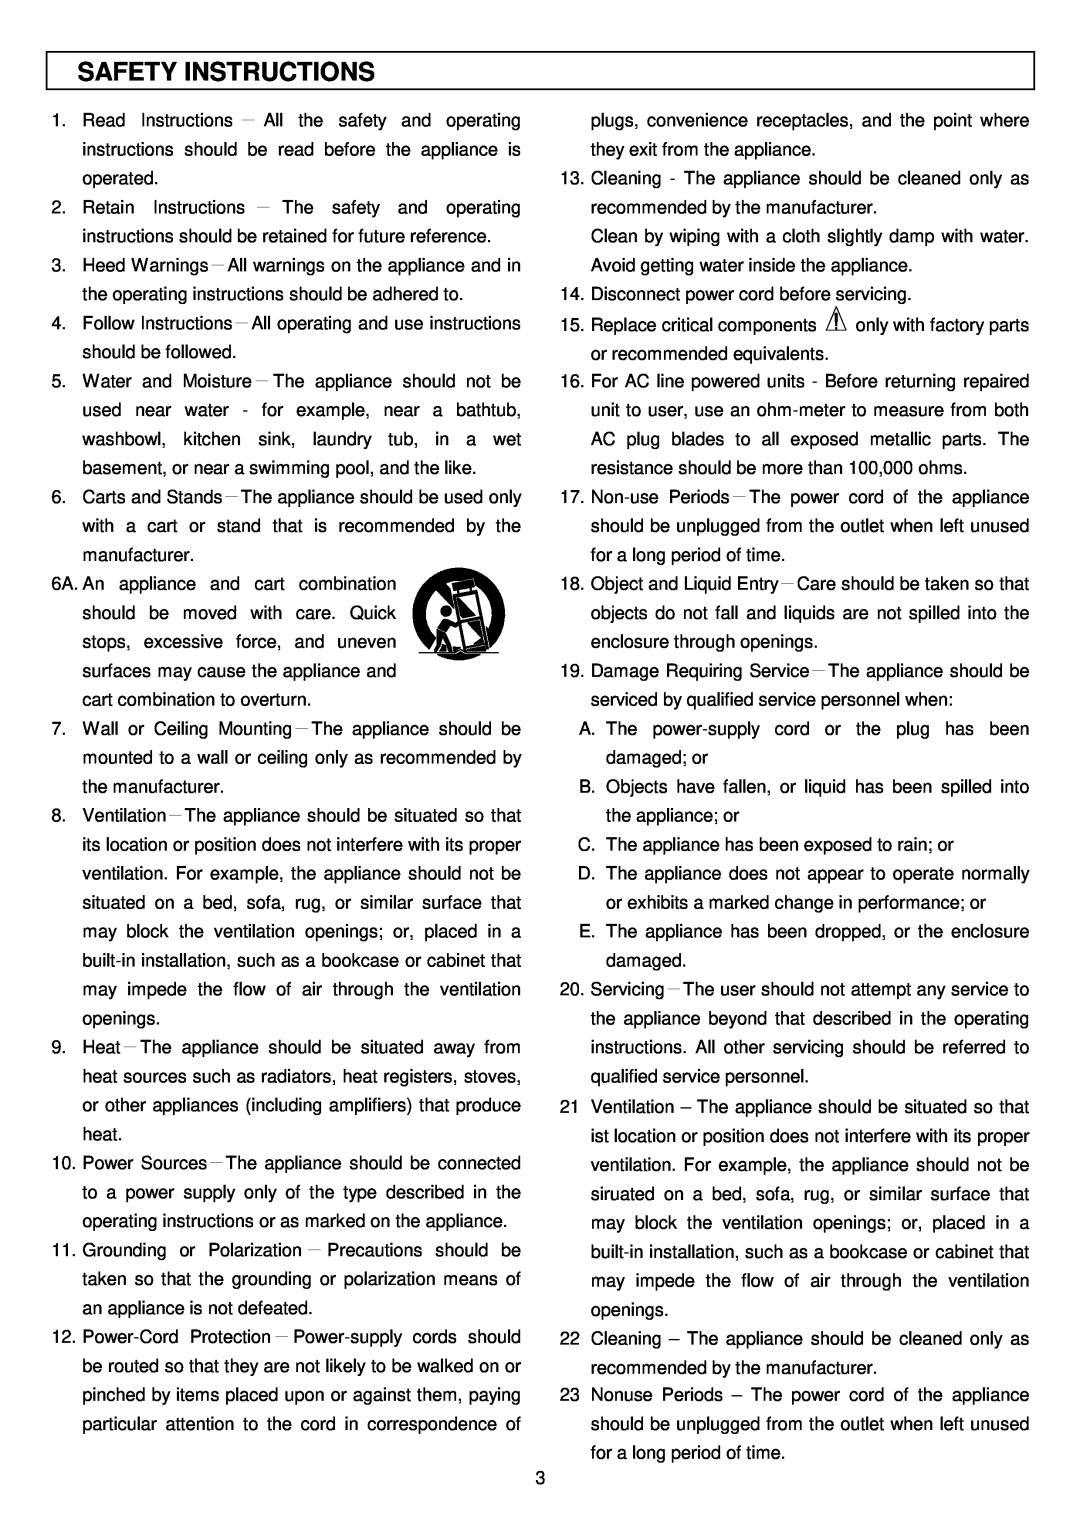 Stanton S-500 user manual Safety Instructions 